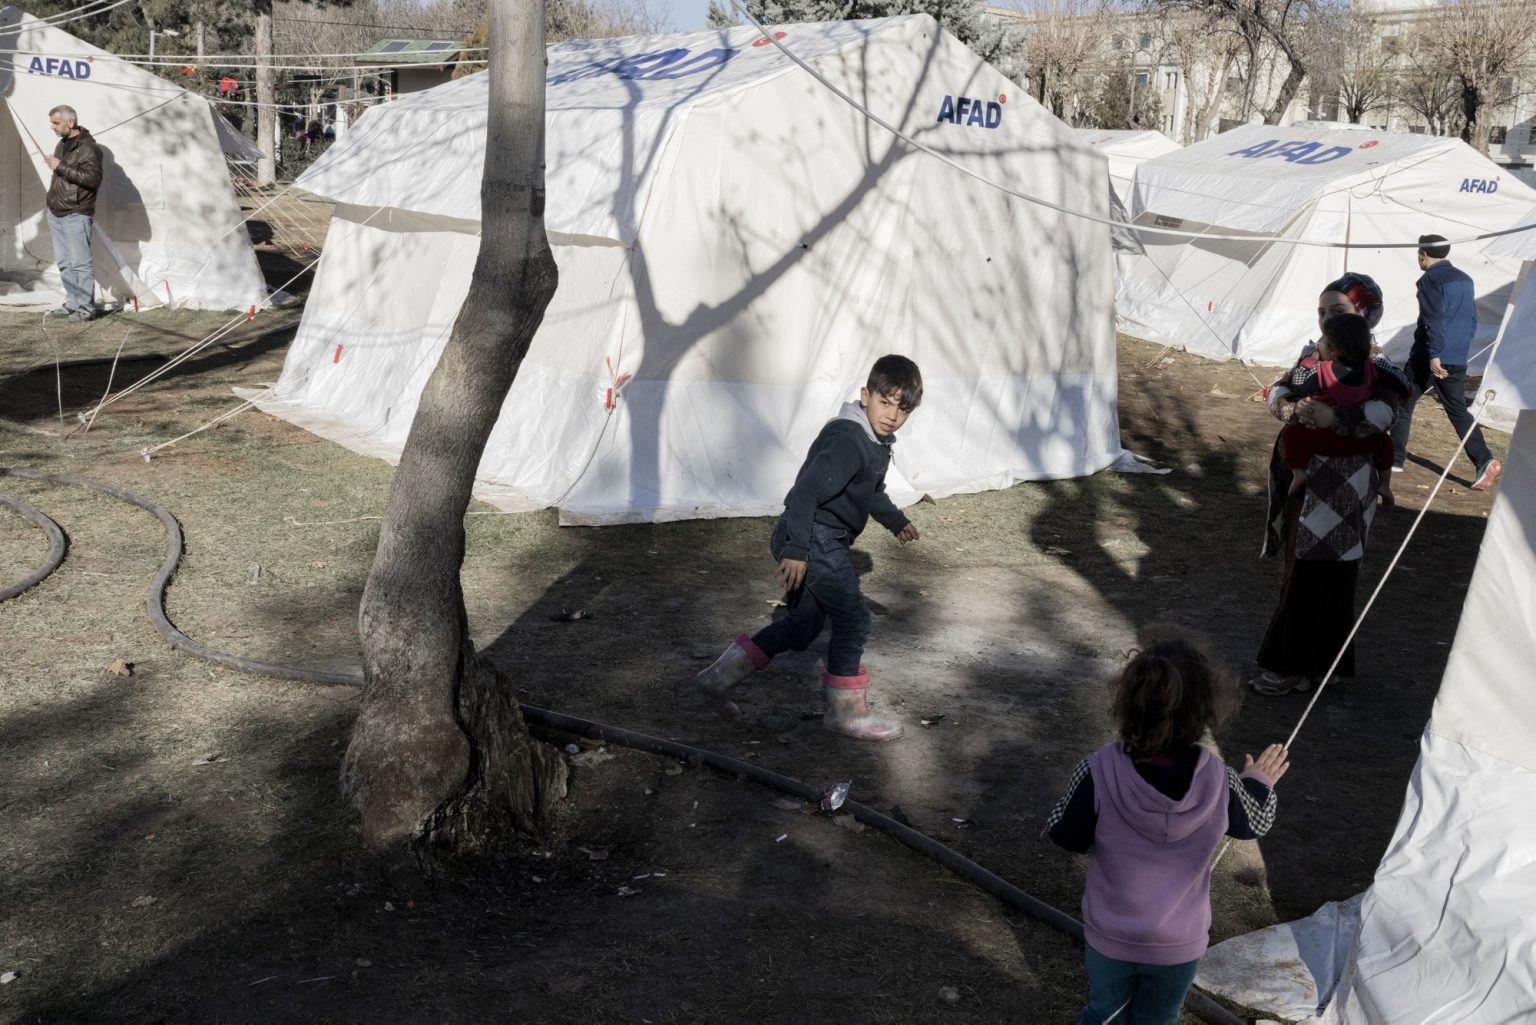 Diyarbakir, Turkey, February 2023 - The aftermath of the earthquake that hit southern Turkey and northern Syria. Civilians stand in a tent camp in the city of Diyarbakir. ><
Diyarbakir, Turchia, febbraio 2023  Le conseguenze del terremoto che ha colpito la Turchia del Sud e la Siria del nord.